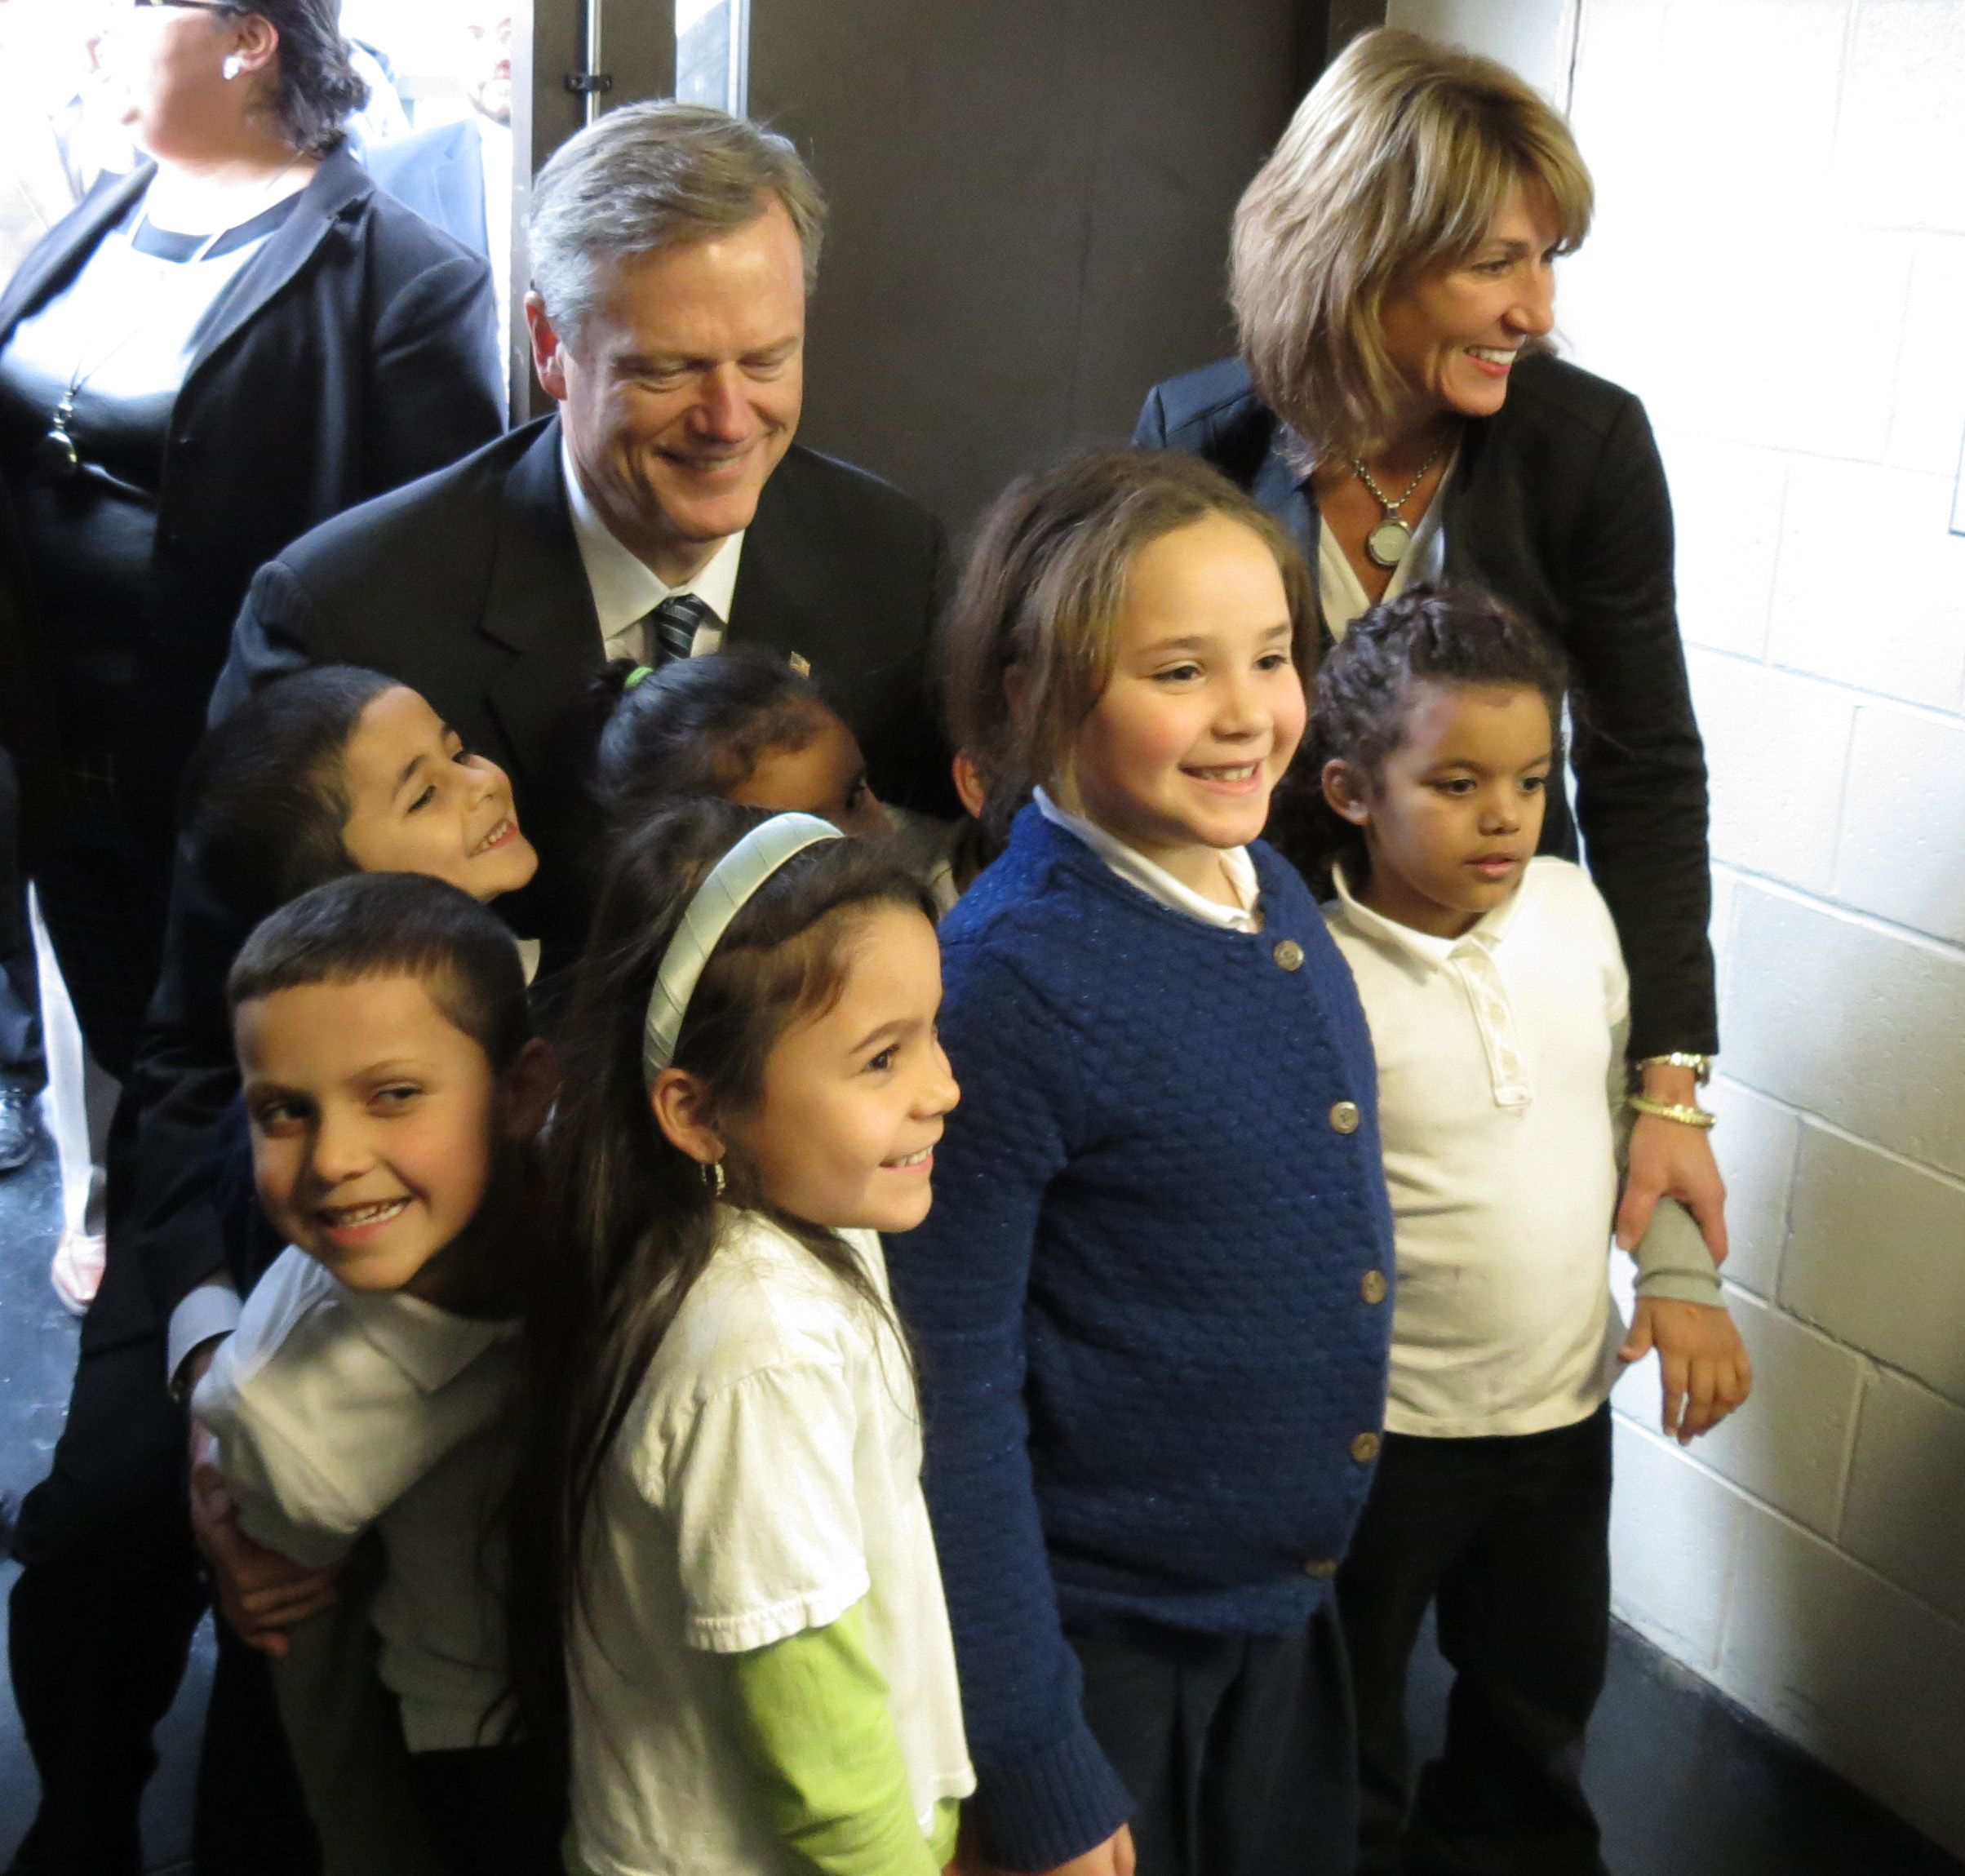 VIDEO: Charlie Baker Visits the Robert Frost School in Lawrence Day Before Inaugural